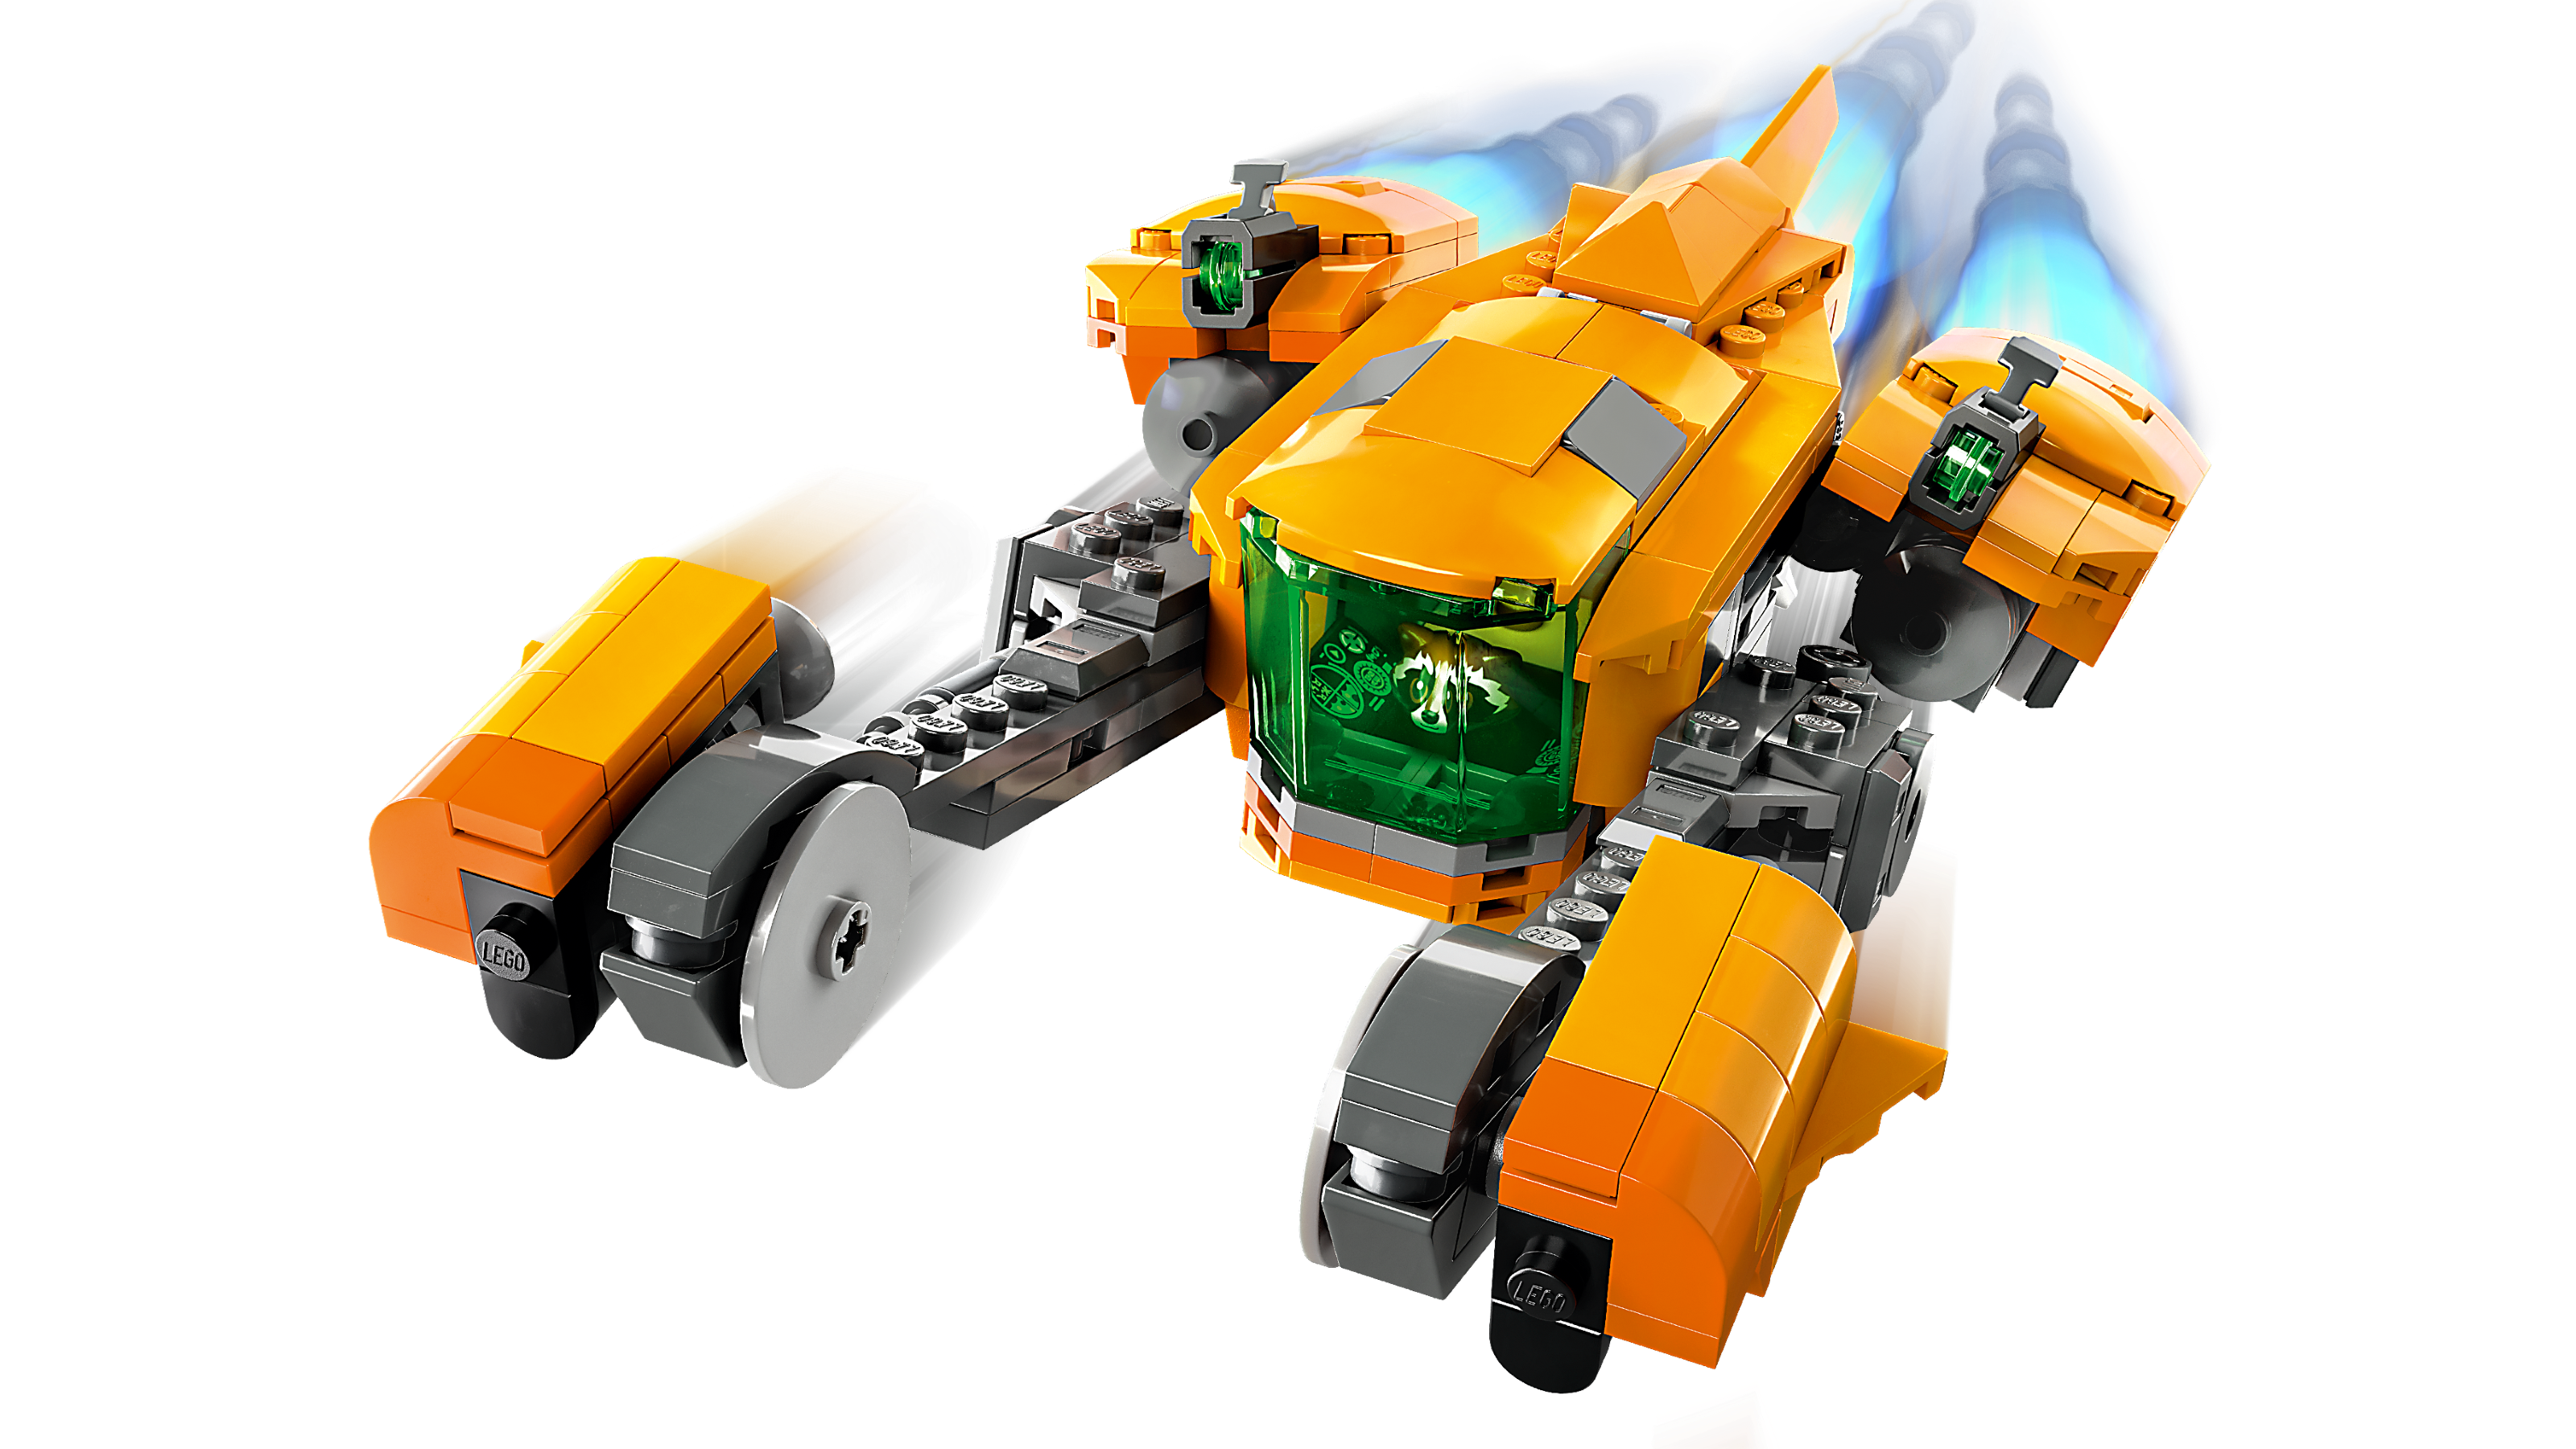 Baby Rocket's Ship 76254 | Marvel | Buy online at the Official LEGO® Shop US